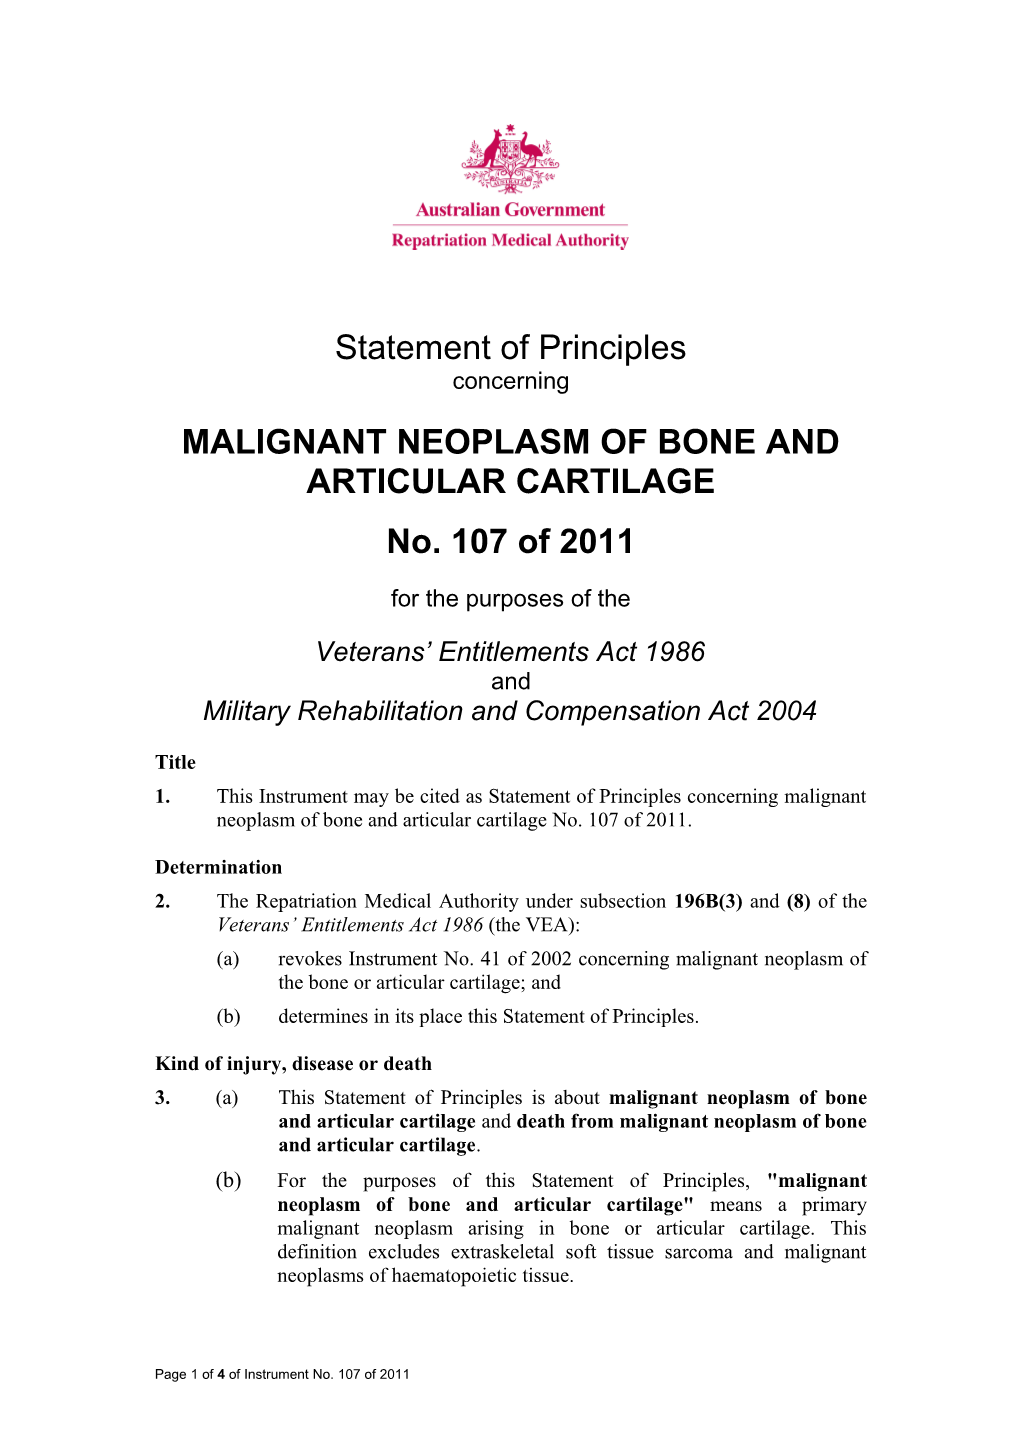 Statement of Principles 107 of 2011 MN Bone and Articular Cartilage Balance of Probabilities